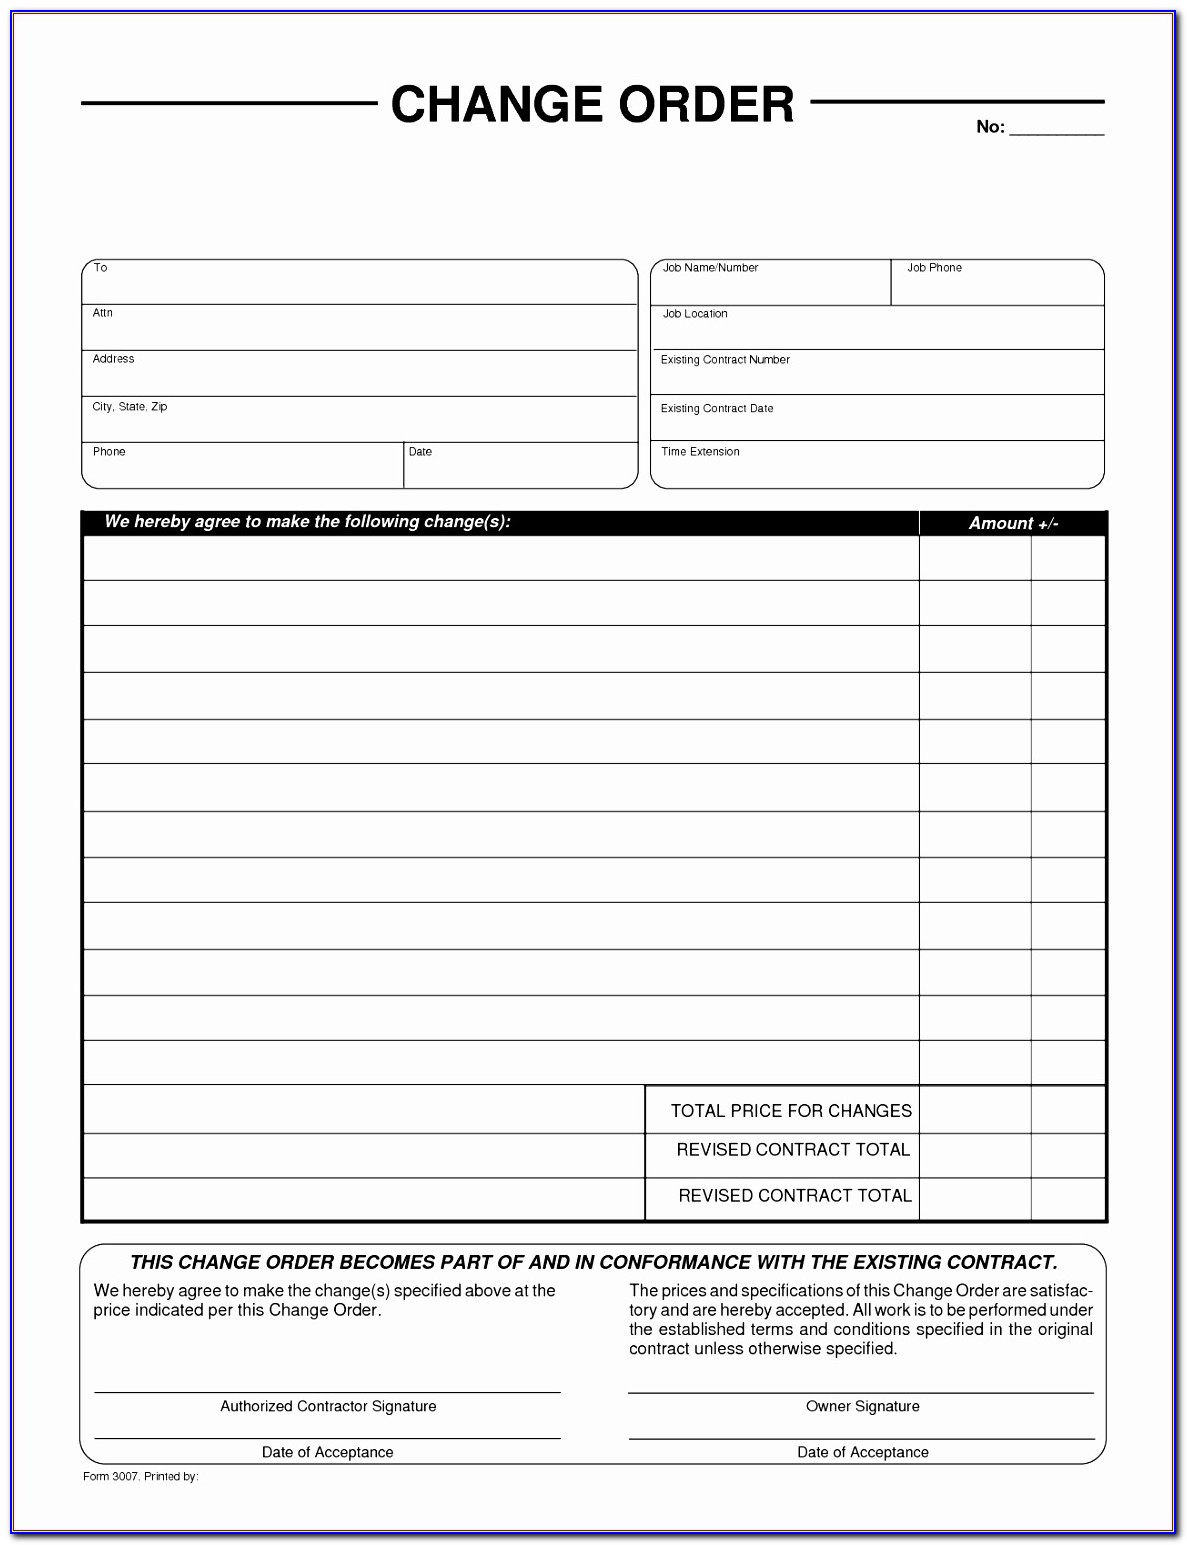 Free Change Order Template Excel N0osh Beautiful Change Of Order Form By Liferetreat Change Order Form Template